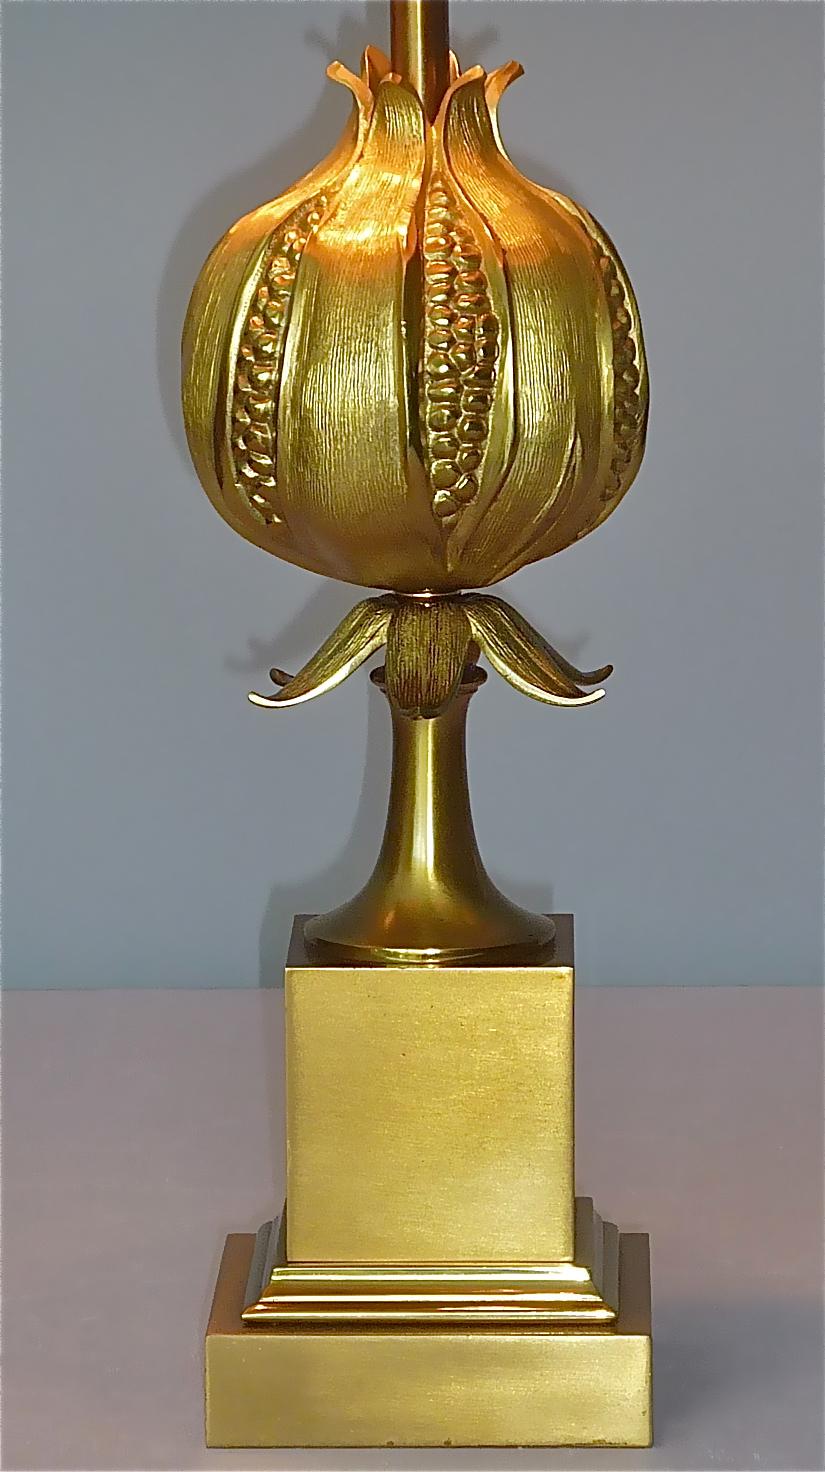 Rare Signed Gilt Bronze French Table Lamp Maison Charles Pomgranate 1970s Jansen For Sale 8